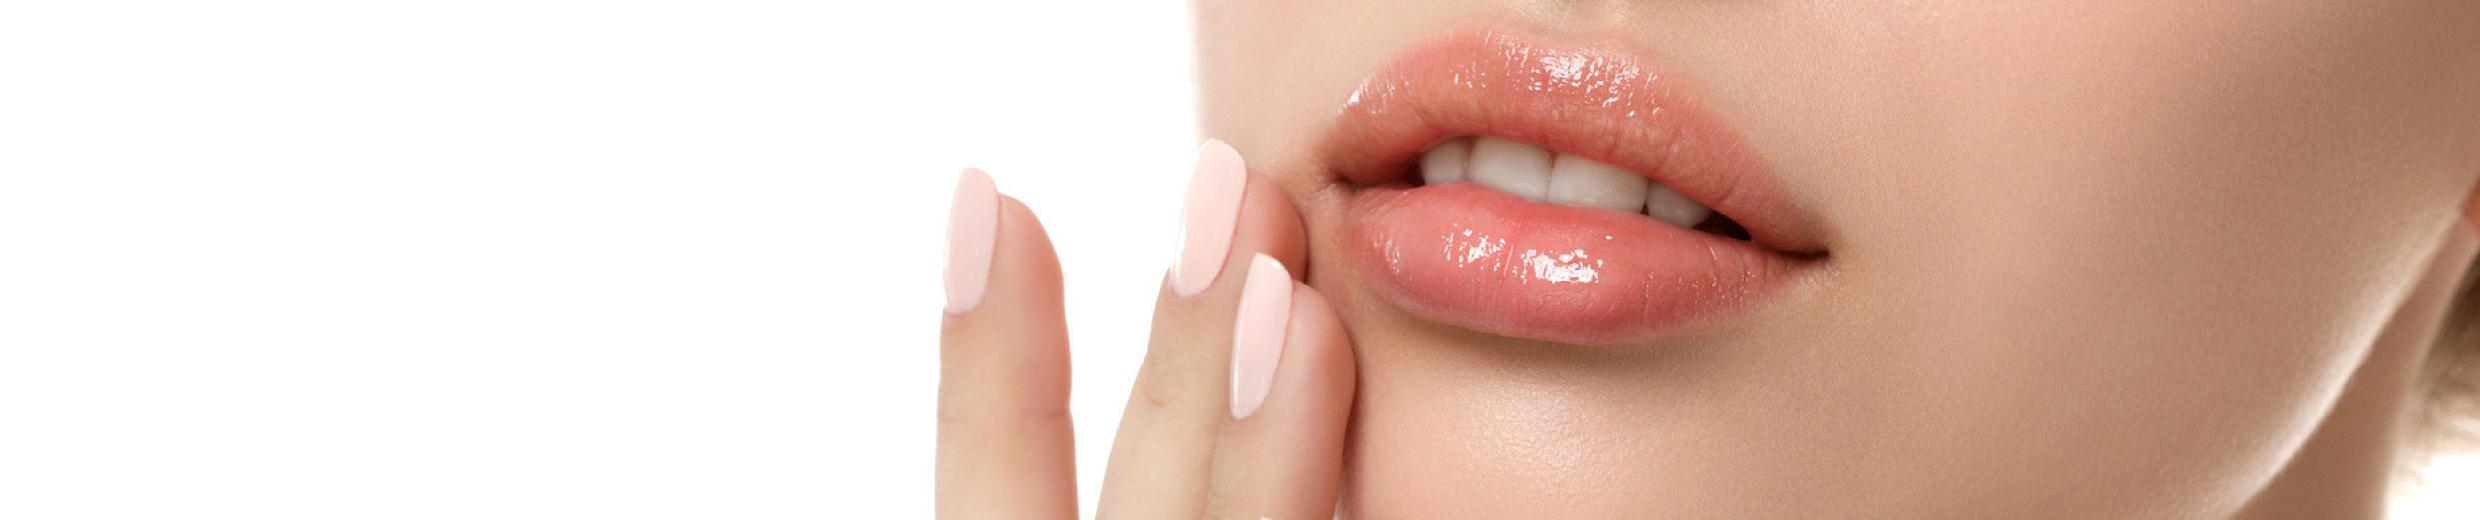 Lip Care for Less: Get Your Plushest Pout on the Cheap (or Even DIY)